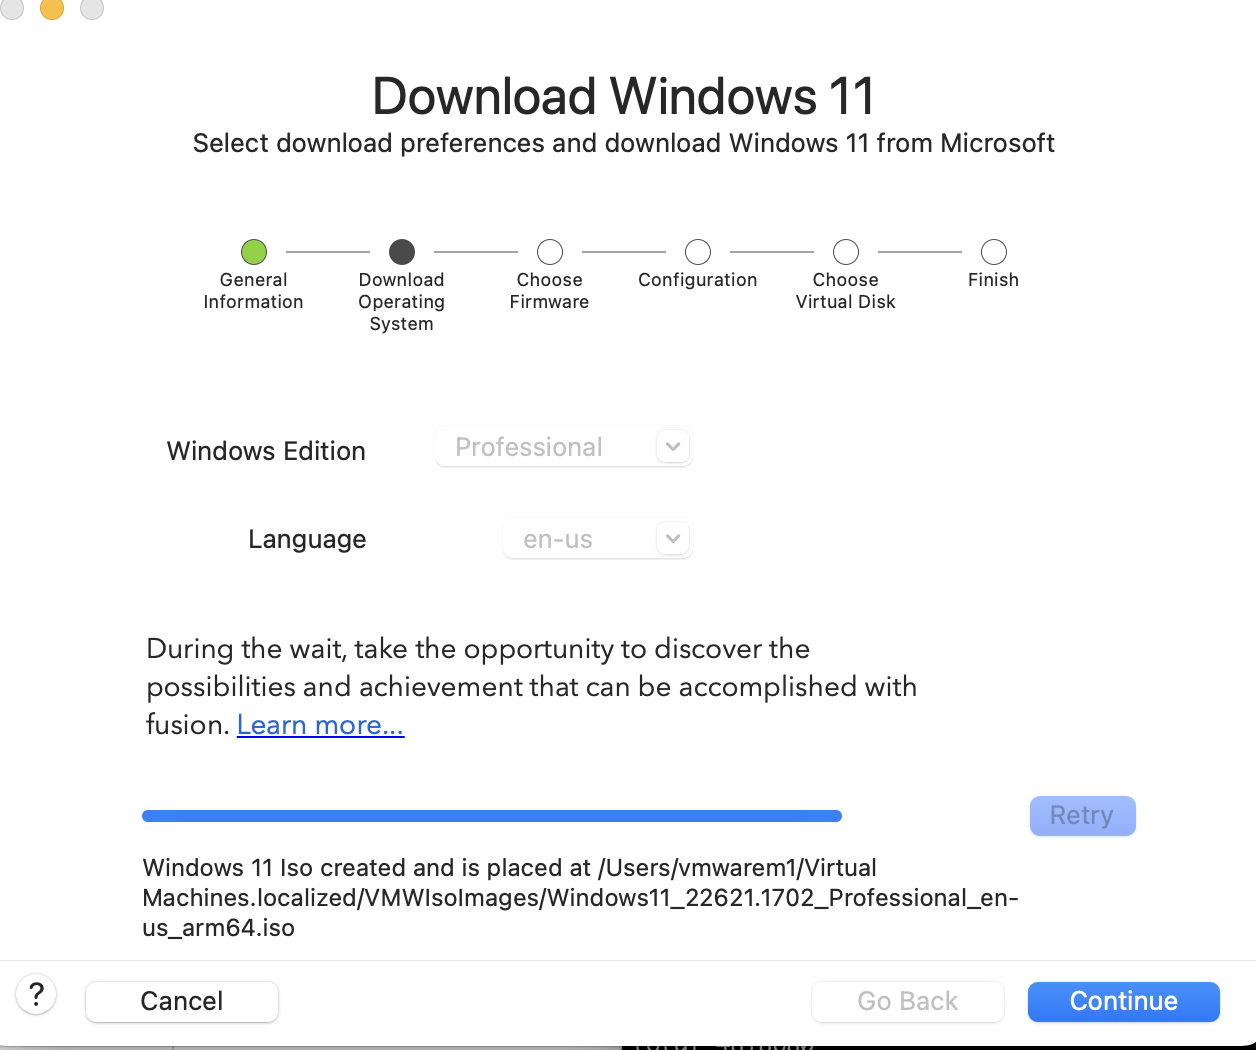 The screenshot shows completion of the Windows 11 download and ISO creation.